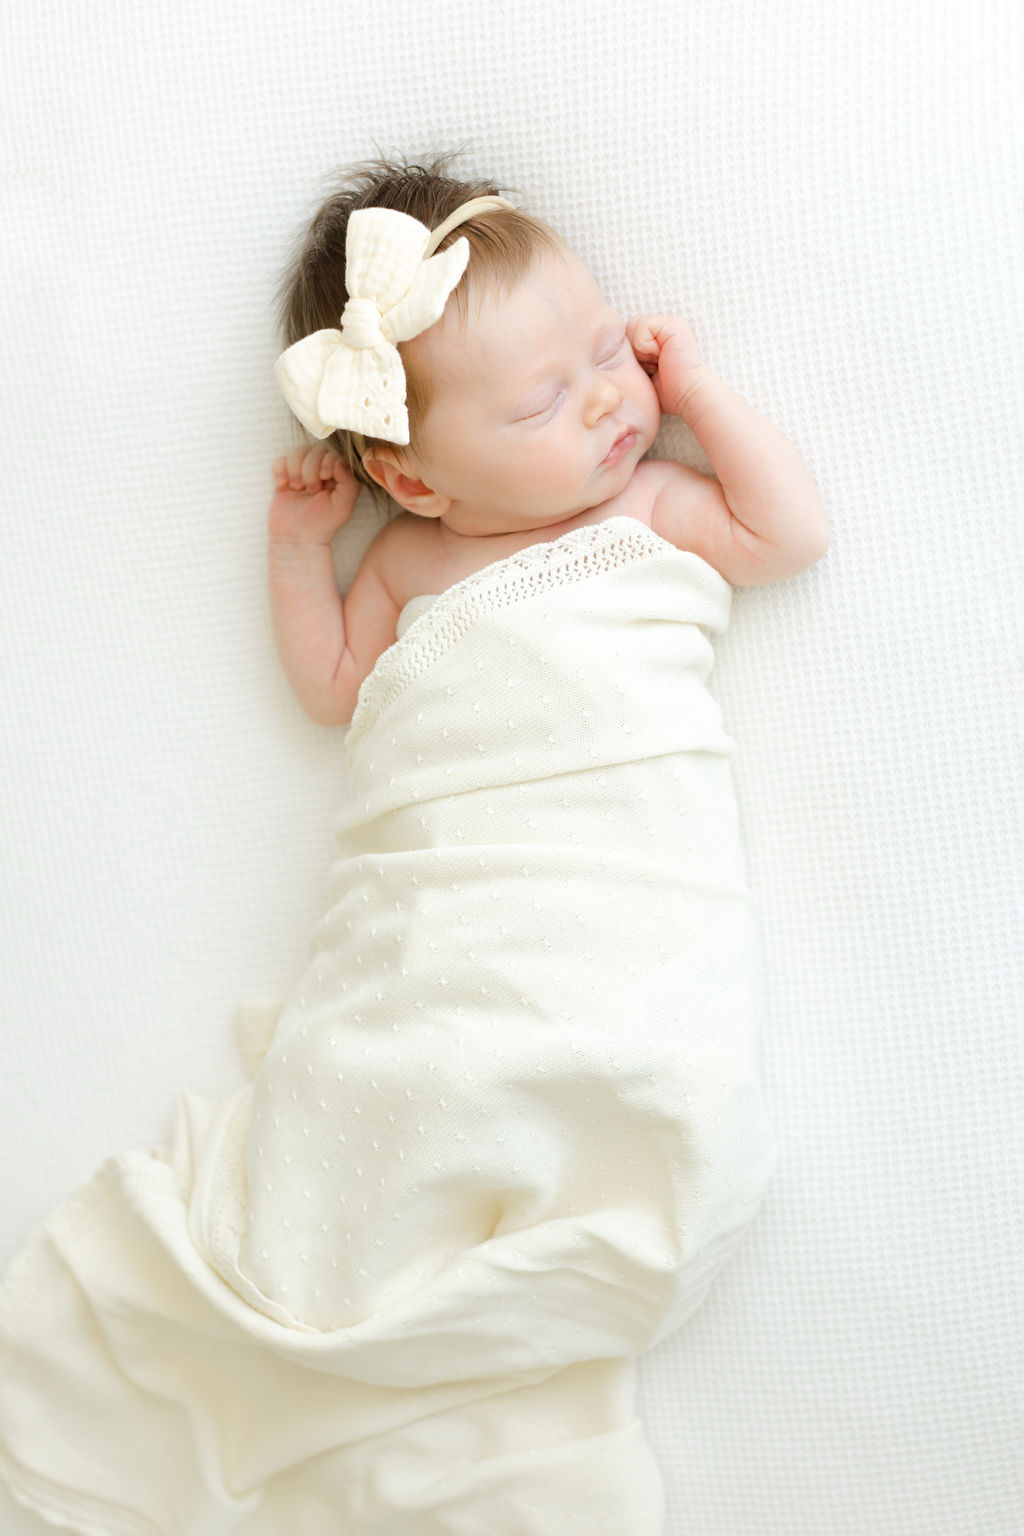 A newborn baby sleeps in a cream blanket and matching bow on a white bed